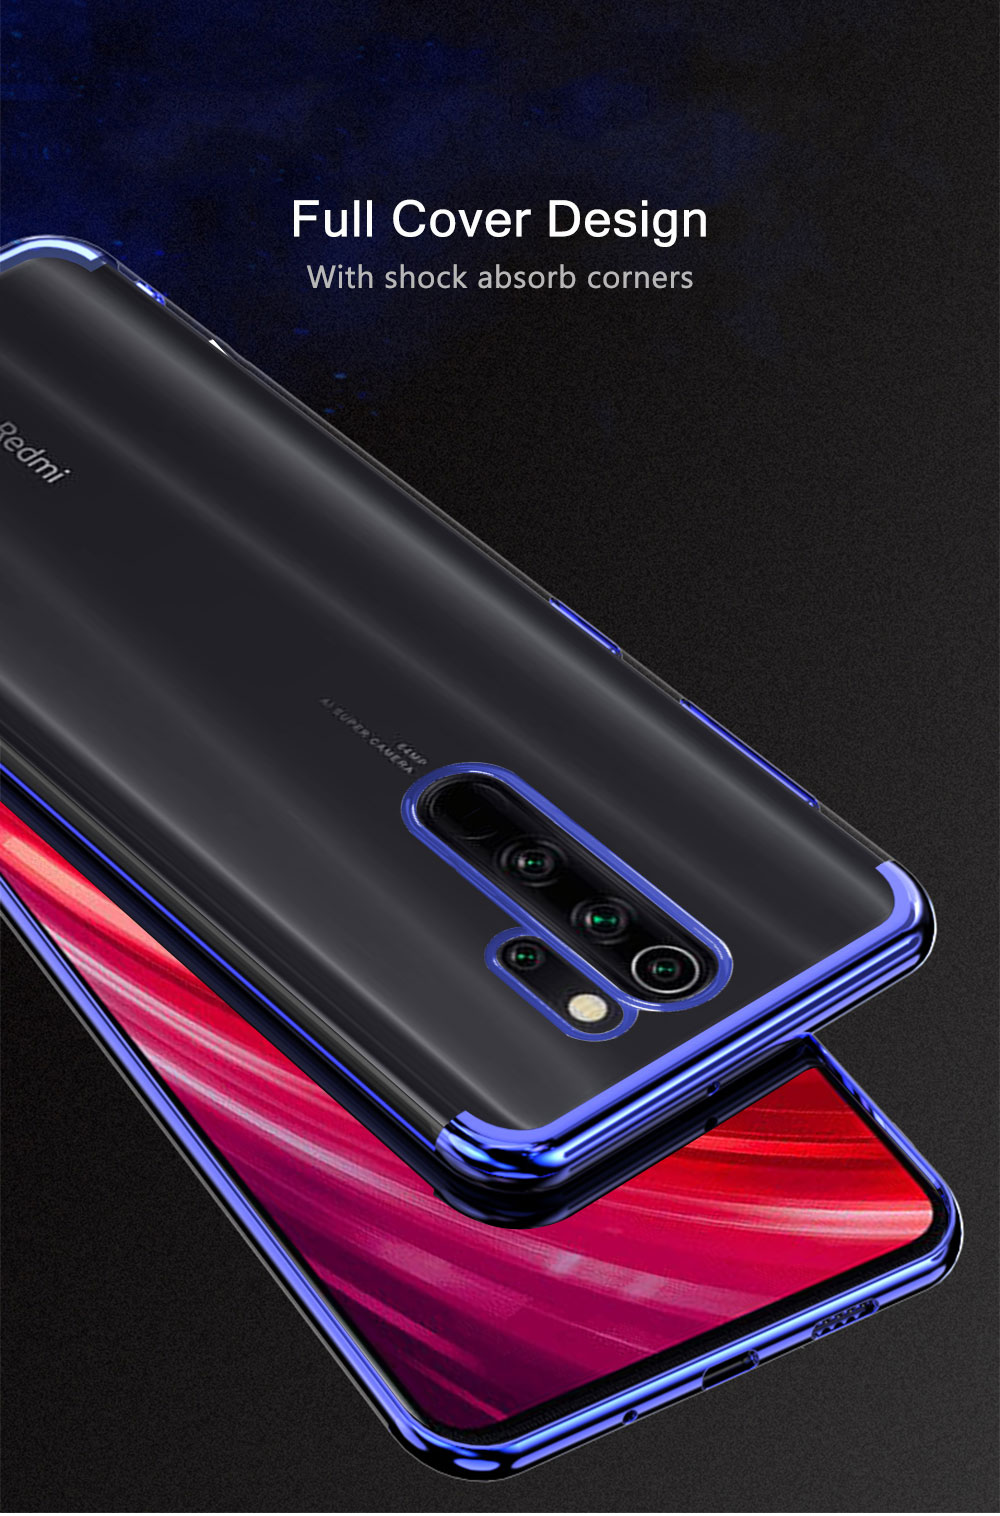 Bakeey-Plating-Shockproof-Transparent-Soft-TPU-Protective-Case-for-Xiaomi-Redmi-Note-8-pro-1575450-7